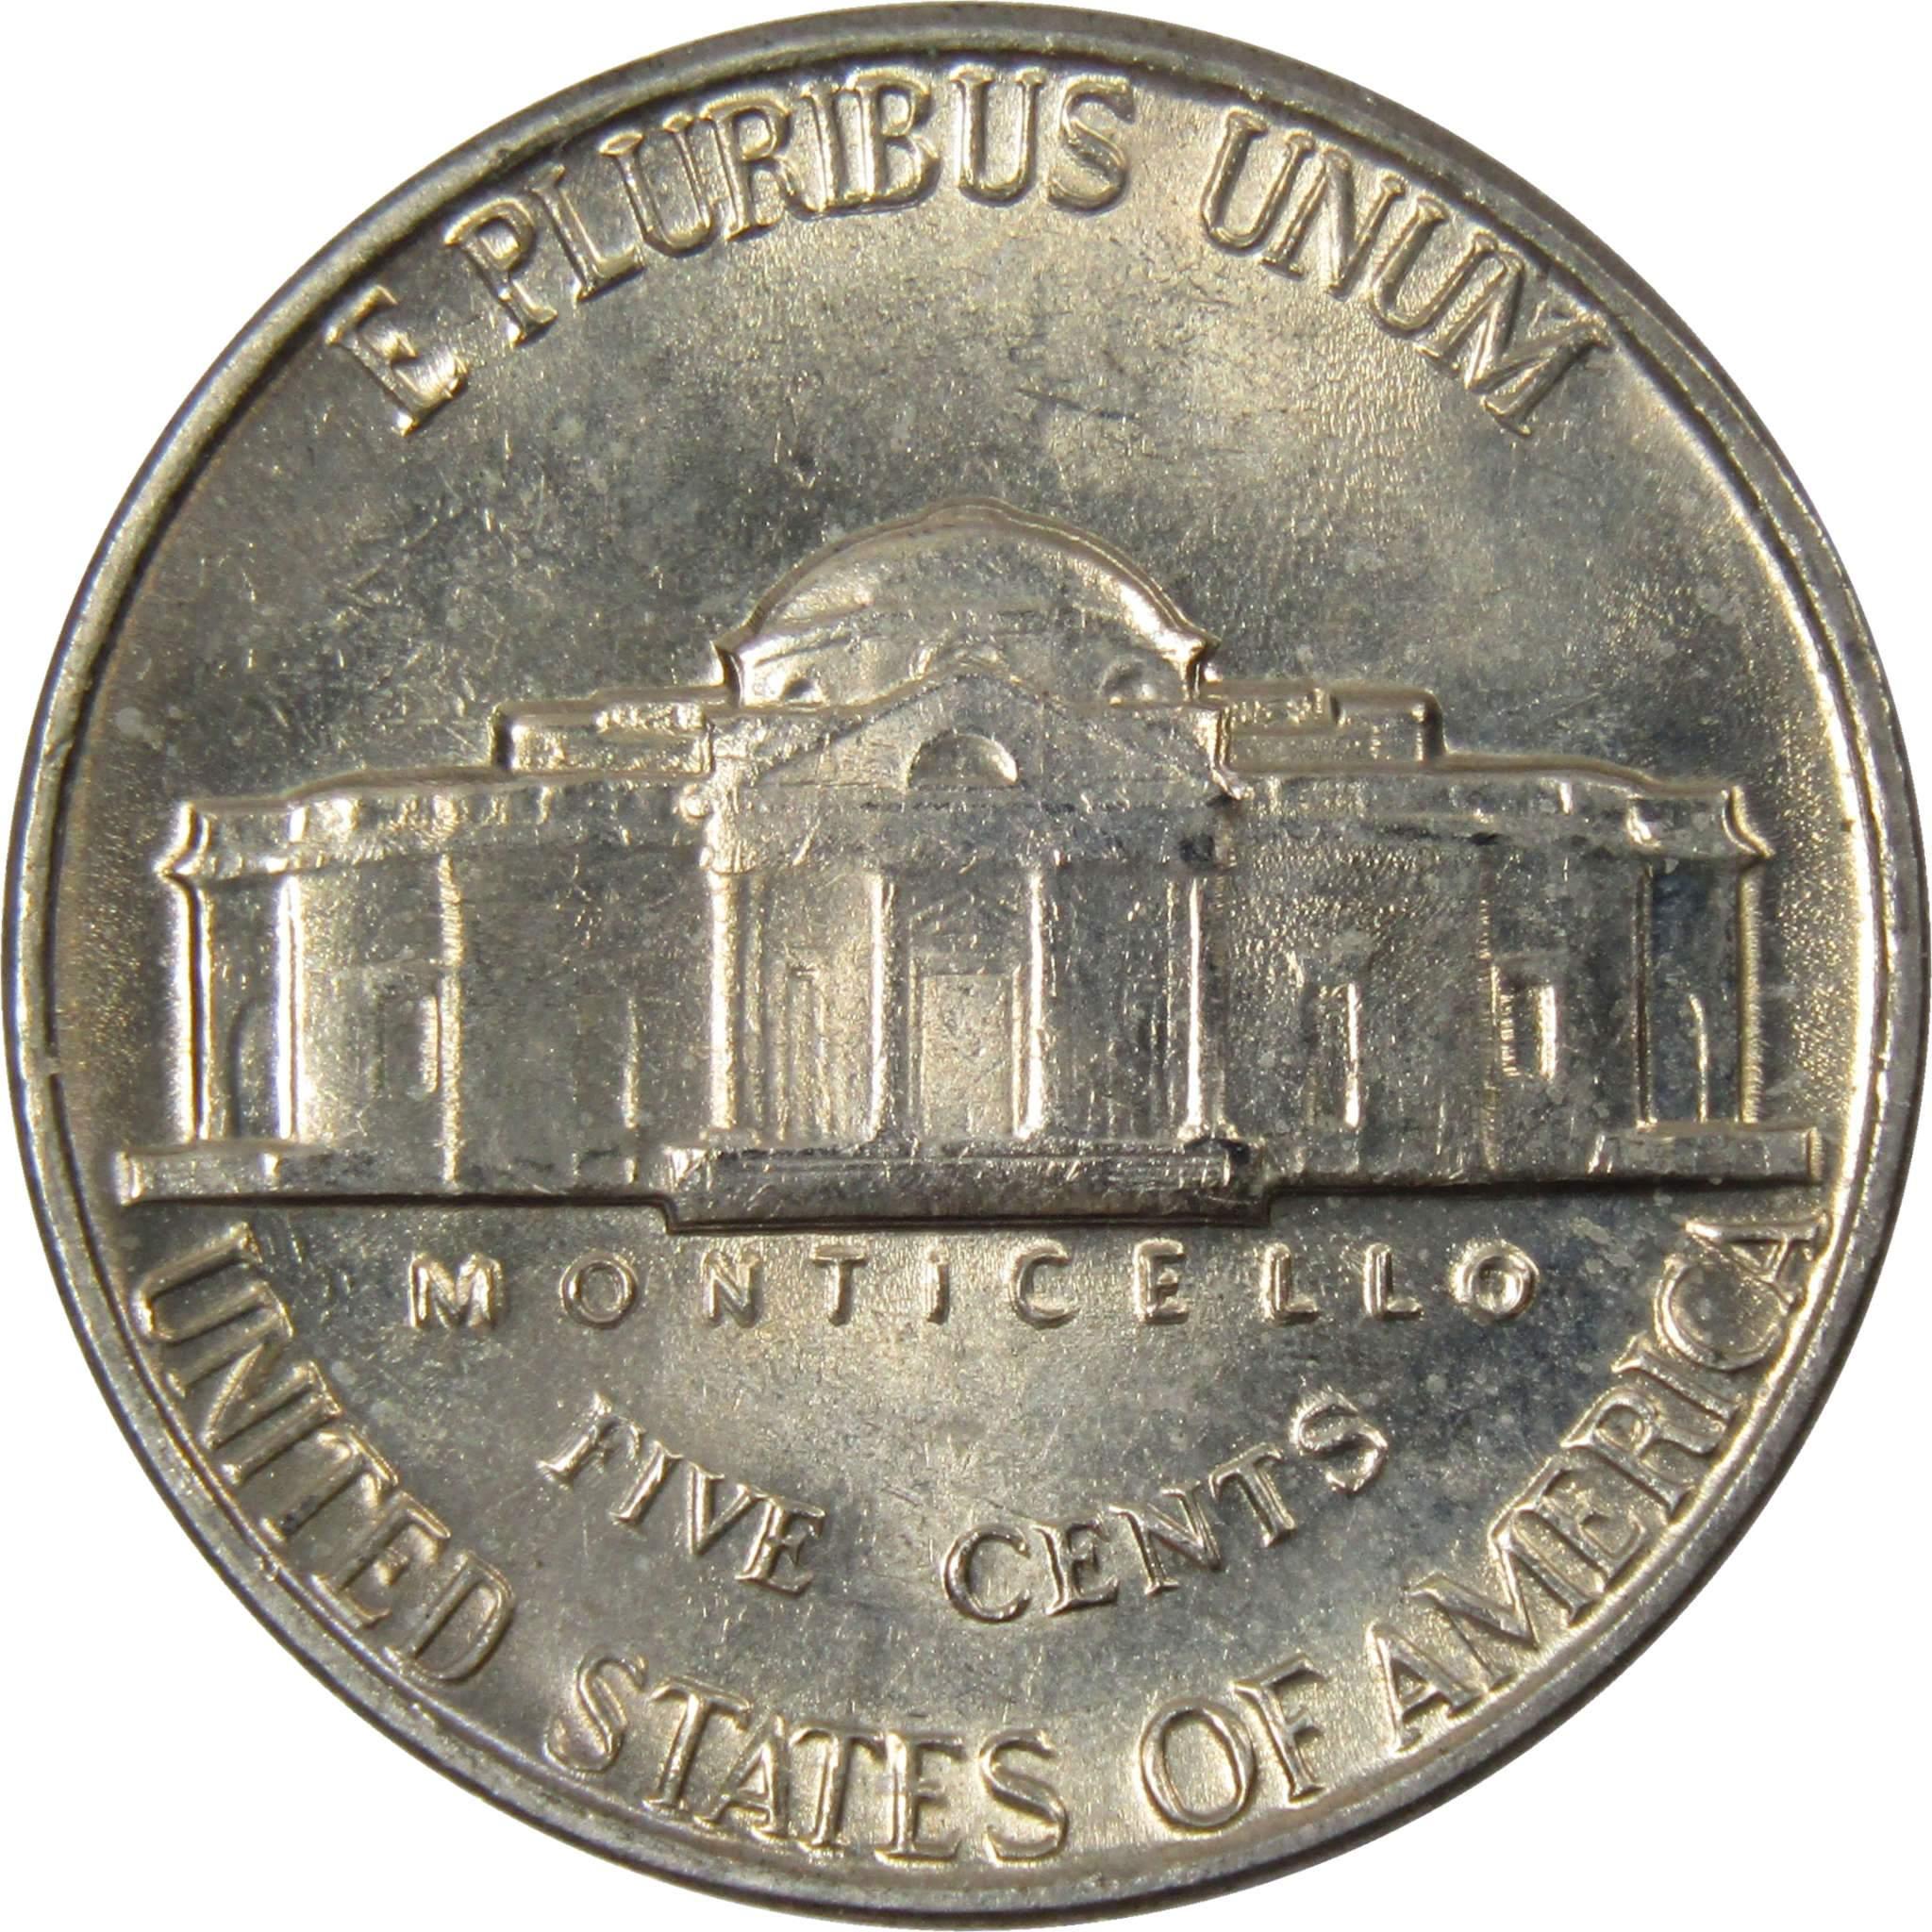 nickel coin front and back